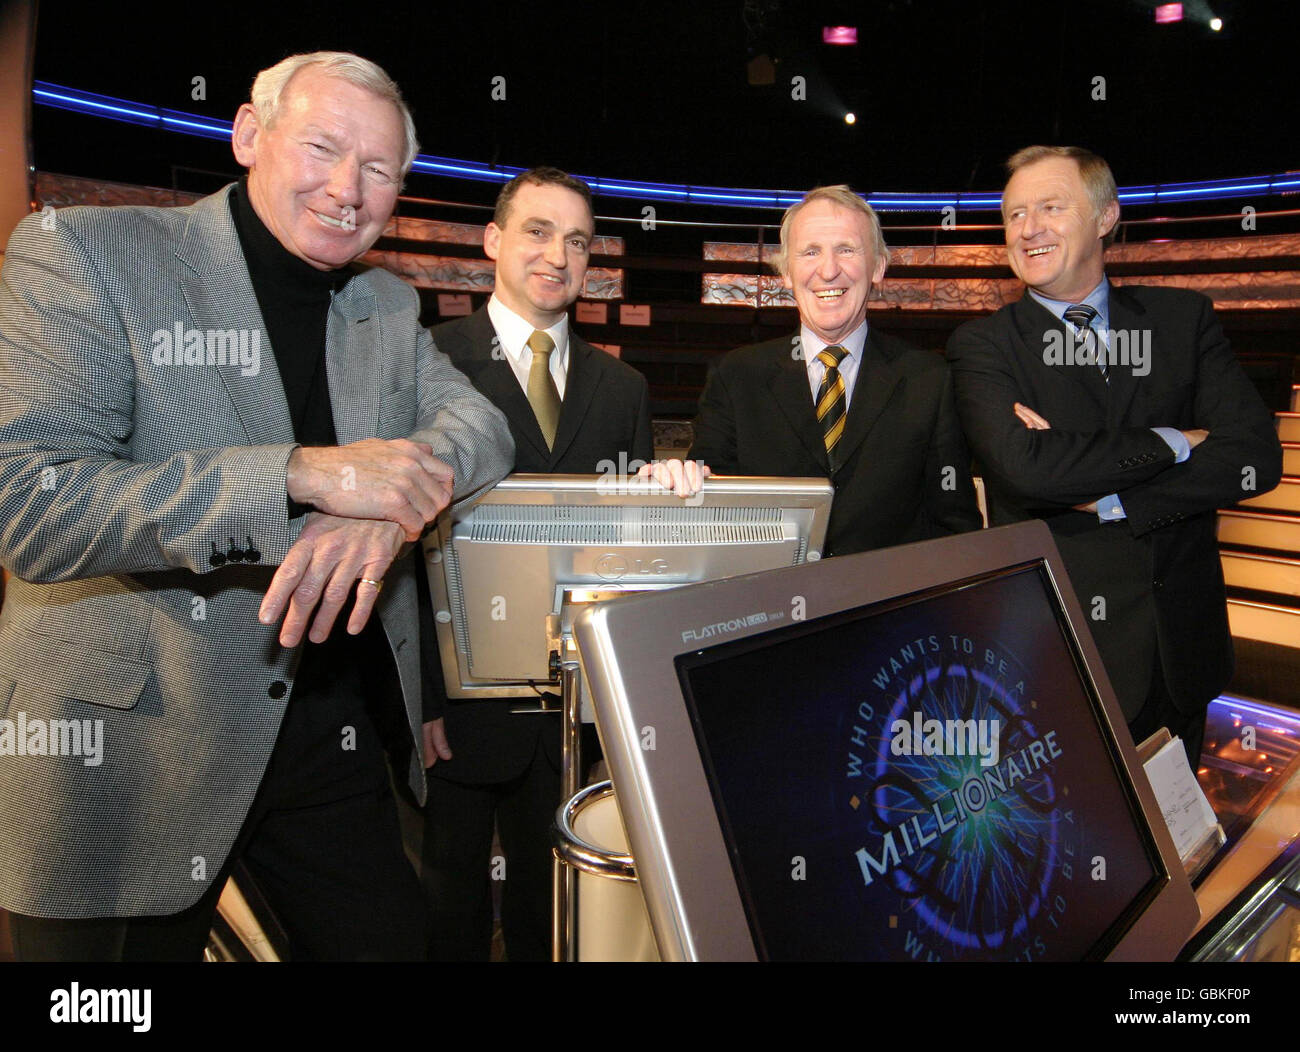 Who Wants To Be A Millionaire presenter Chris Tarrant (r) with former footballers Bob Wilson (l), Paul McStay (second l) and Pat Crerand (second r) at Elstree Studios, where the launch of a new non-broadcast version of Millionaire was announced. Fans of Arsenal, Celtic and Manchester United will have the chance to play for a million pounds in front of their fellow supporters in special club-specific versions of the popular TV gameshow Stock Photo